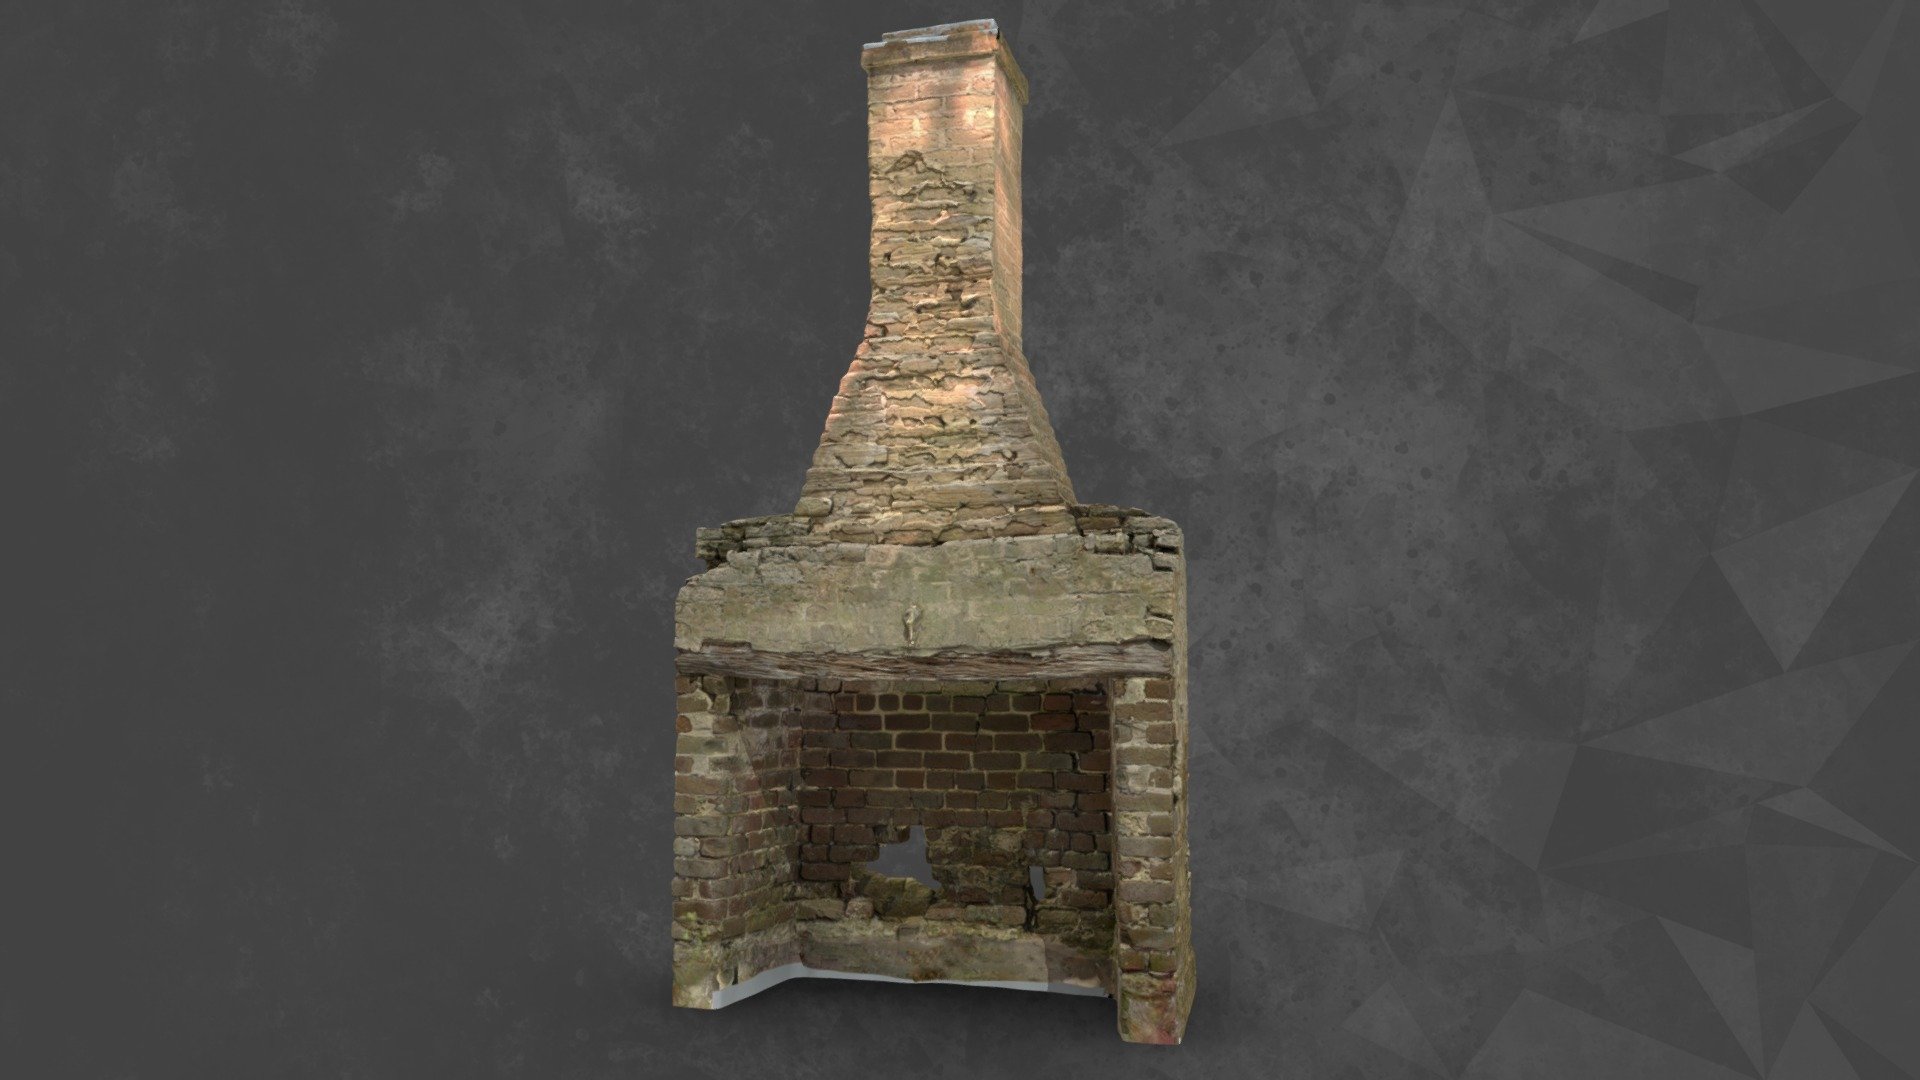 This is a 3D model is from a laser scanning survey of the remains of a slave house chimney (Chimney 3) from the Stafford Plantation on Cumberland Island National Seashore. The Chimneys are a series of 26 hearth and brick remains in three parallel rows that are found nearby the main Stafford plantation house. The site is undergoing restoration treatments and our 3D survey was performed prior to that work, digitally documenting and preserving the site for archival purposes. Our 3D work is additionally assistive with preservation planning and supportive of management needs, and can be utilized for structural repair documentation, monitoring, and condition assessment. Using these models, 3D prints can also be made to examine construction techniques in tactile ways. The resultant 3D models also serve as educational and outreach tools, and promote the importance of these significant and imperiled touchstones to the past 3d model